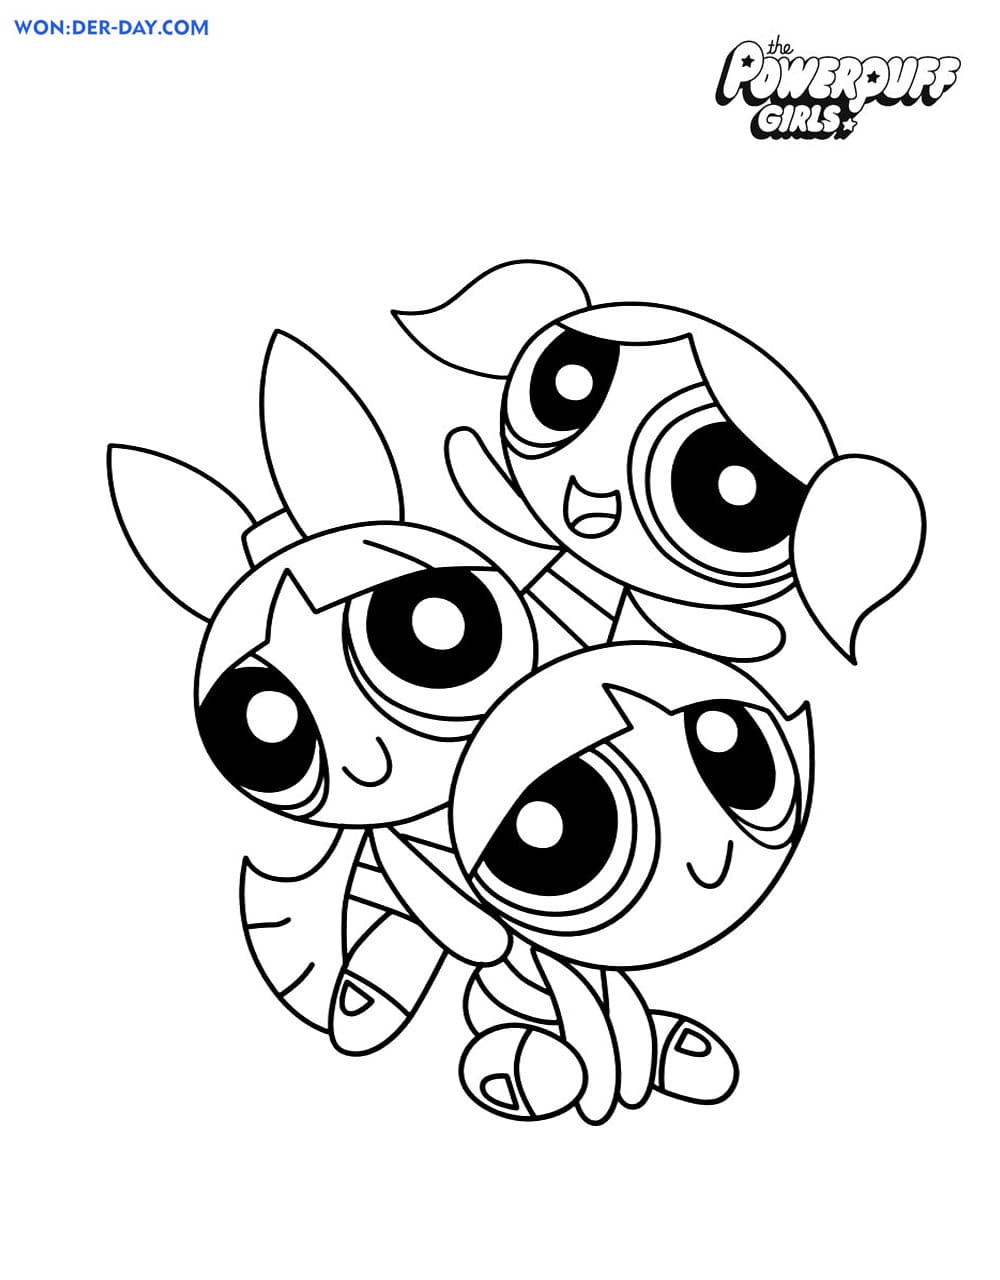 Powerpuff Girls Coloring Pages — WONDER-DAY.COM